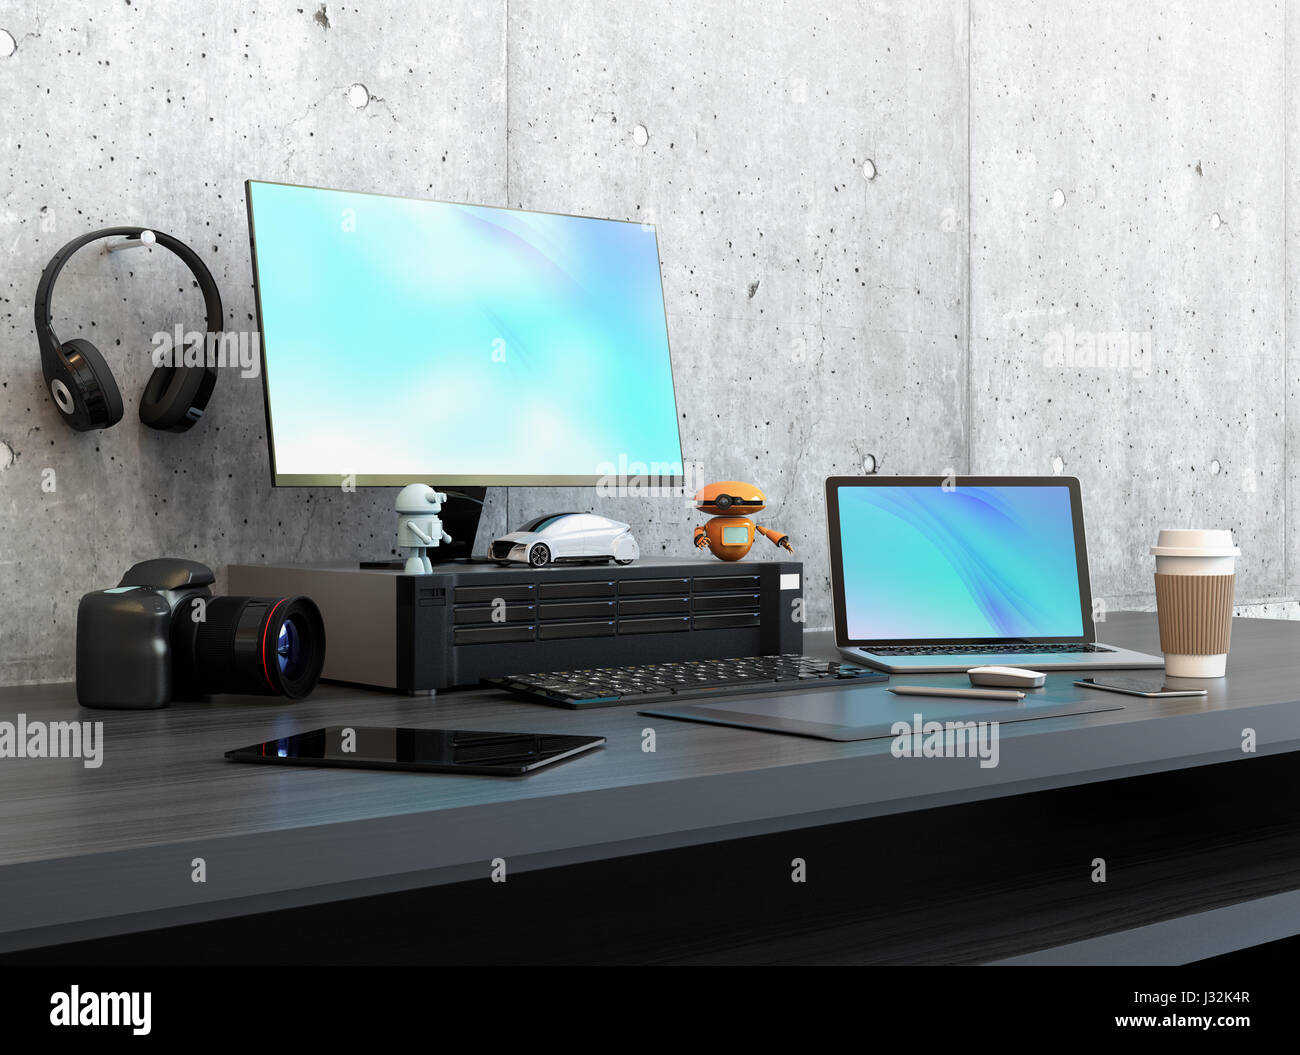 Desktop with widescreen monitor, workstation, laptop PC. 3D rendering image. Stock Photo